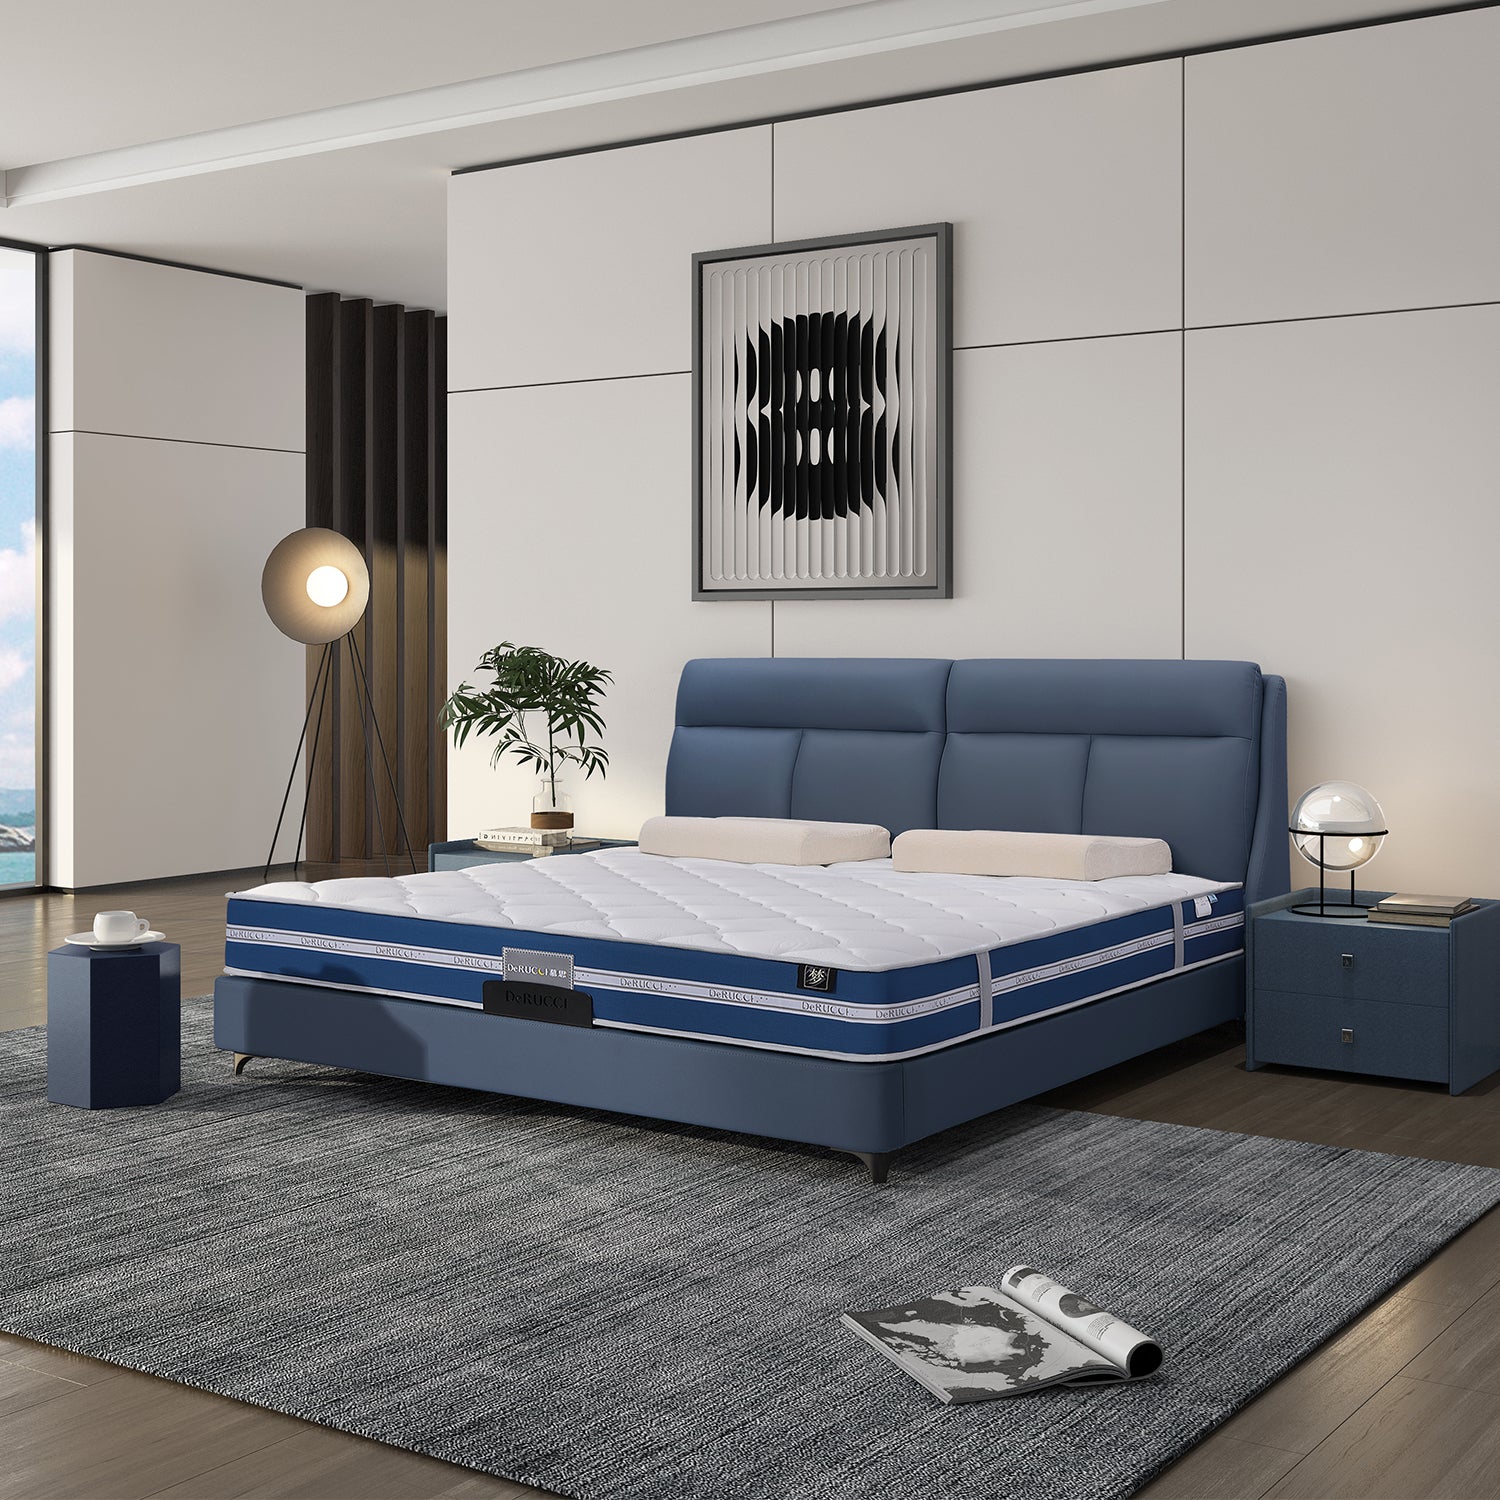 DeRUCCI Bed Frame BOC1 - 002 in blue leather with a padded headboard and white mattress, styled in a modern bedroom with a grey carpet, blue nightstand, lamp, plant, and abstract wall art.